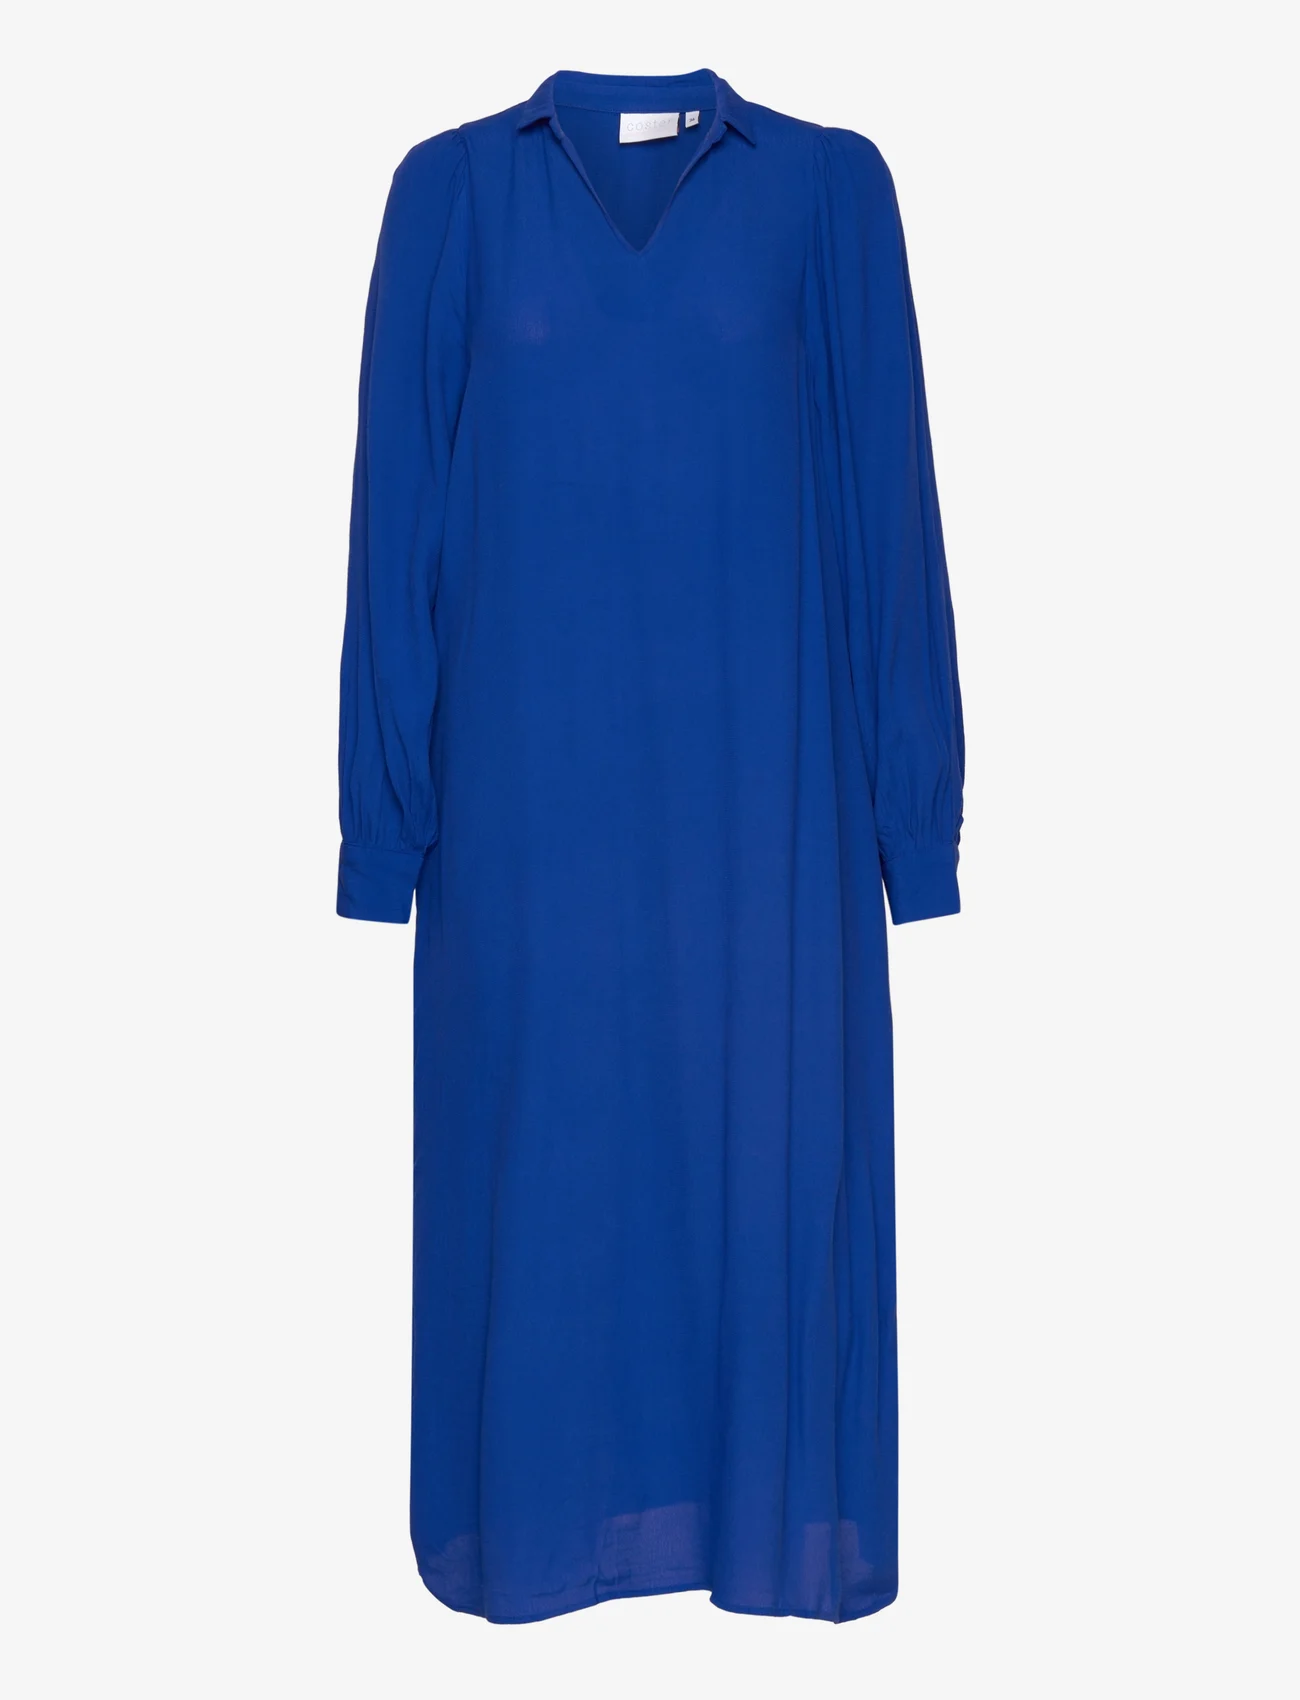 Coster Copenhagen - Dress with wide sleeves - midi dresses - electric blue - 0